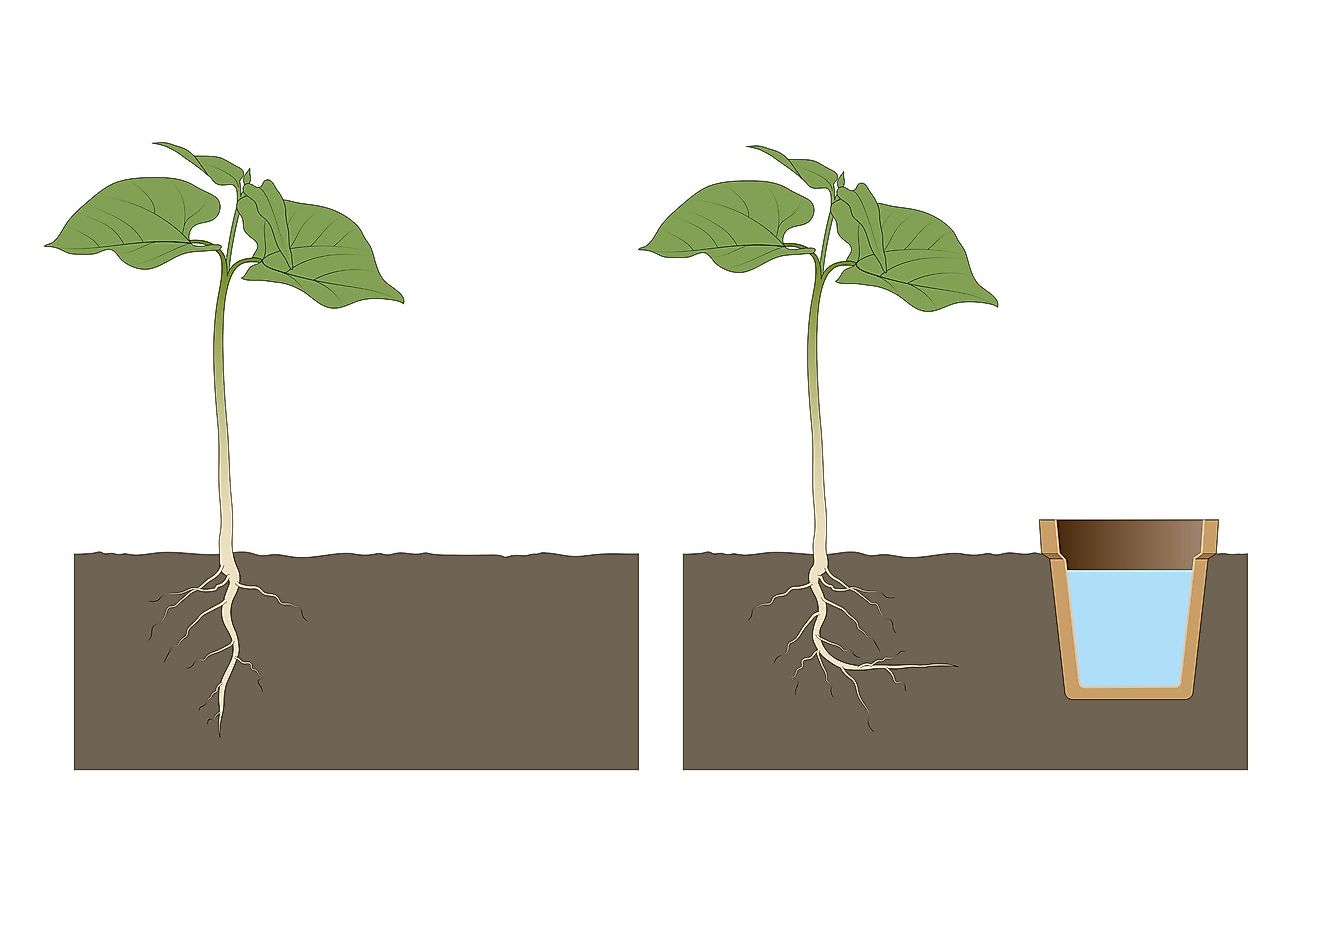 Plants need to control their geotropic tendencies first before they can perform hydrotropism.